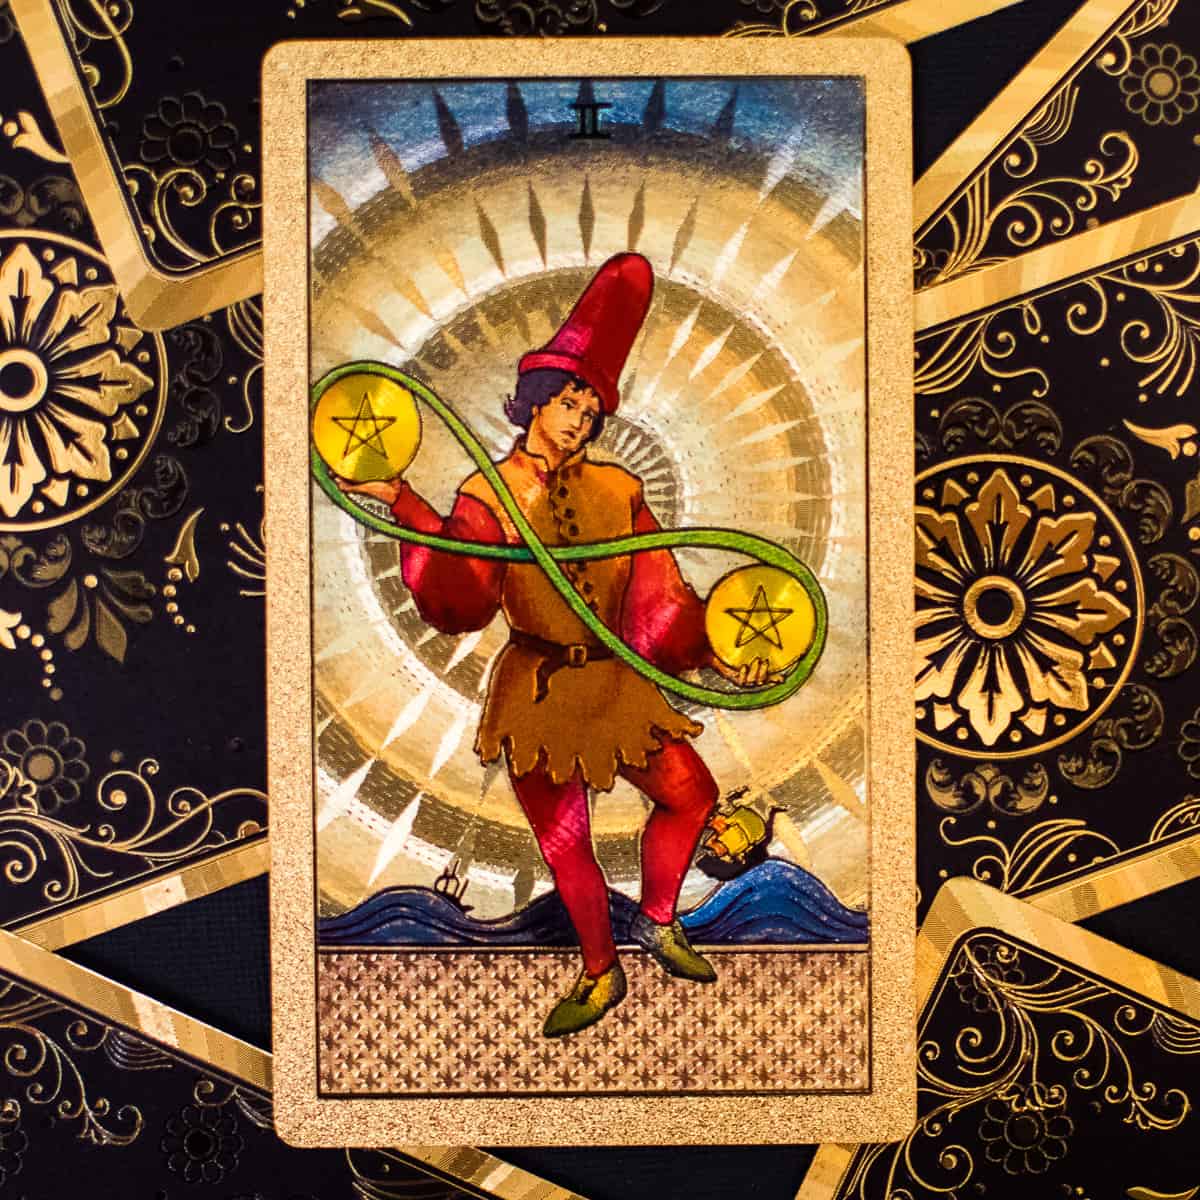 A person juggling two pentacles on a tarot card.